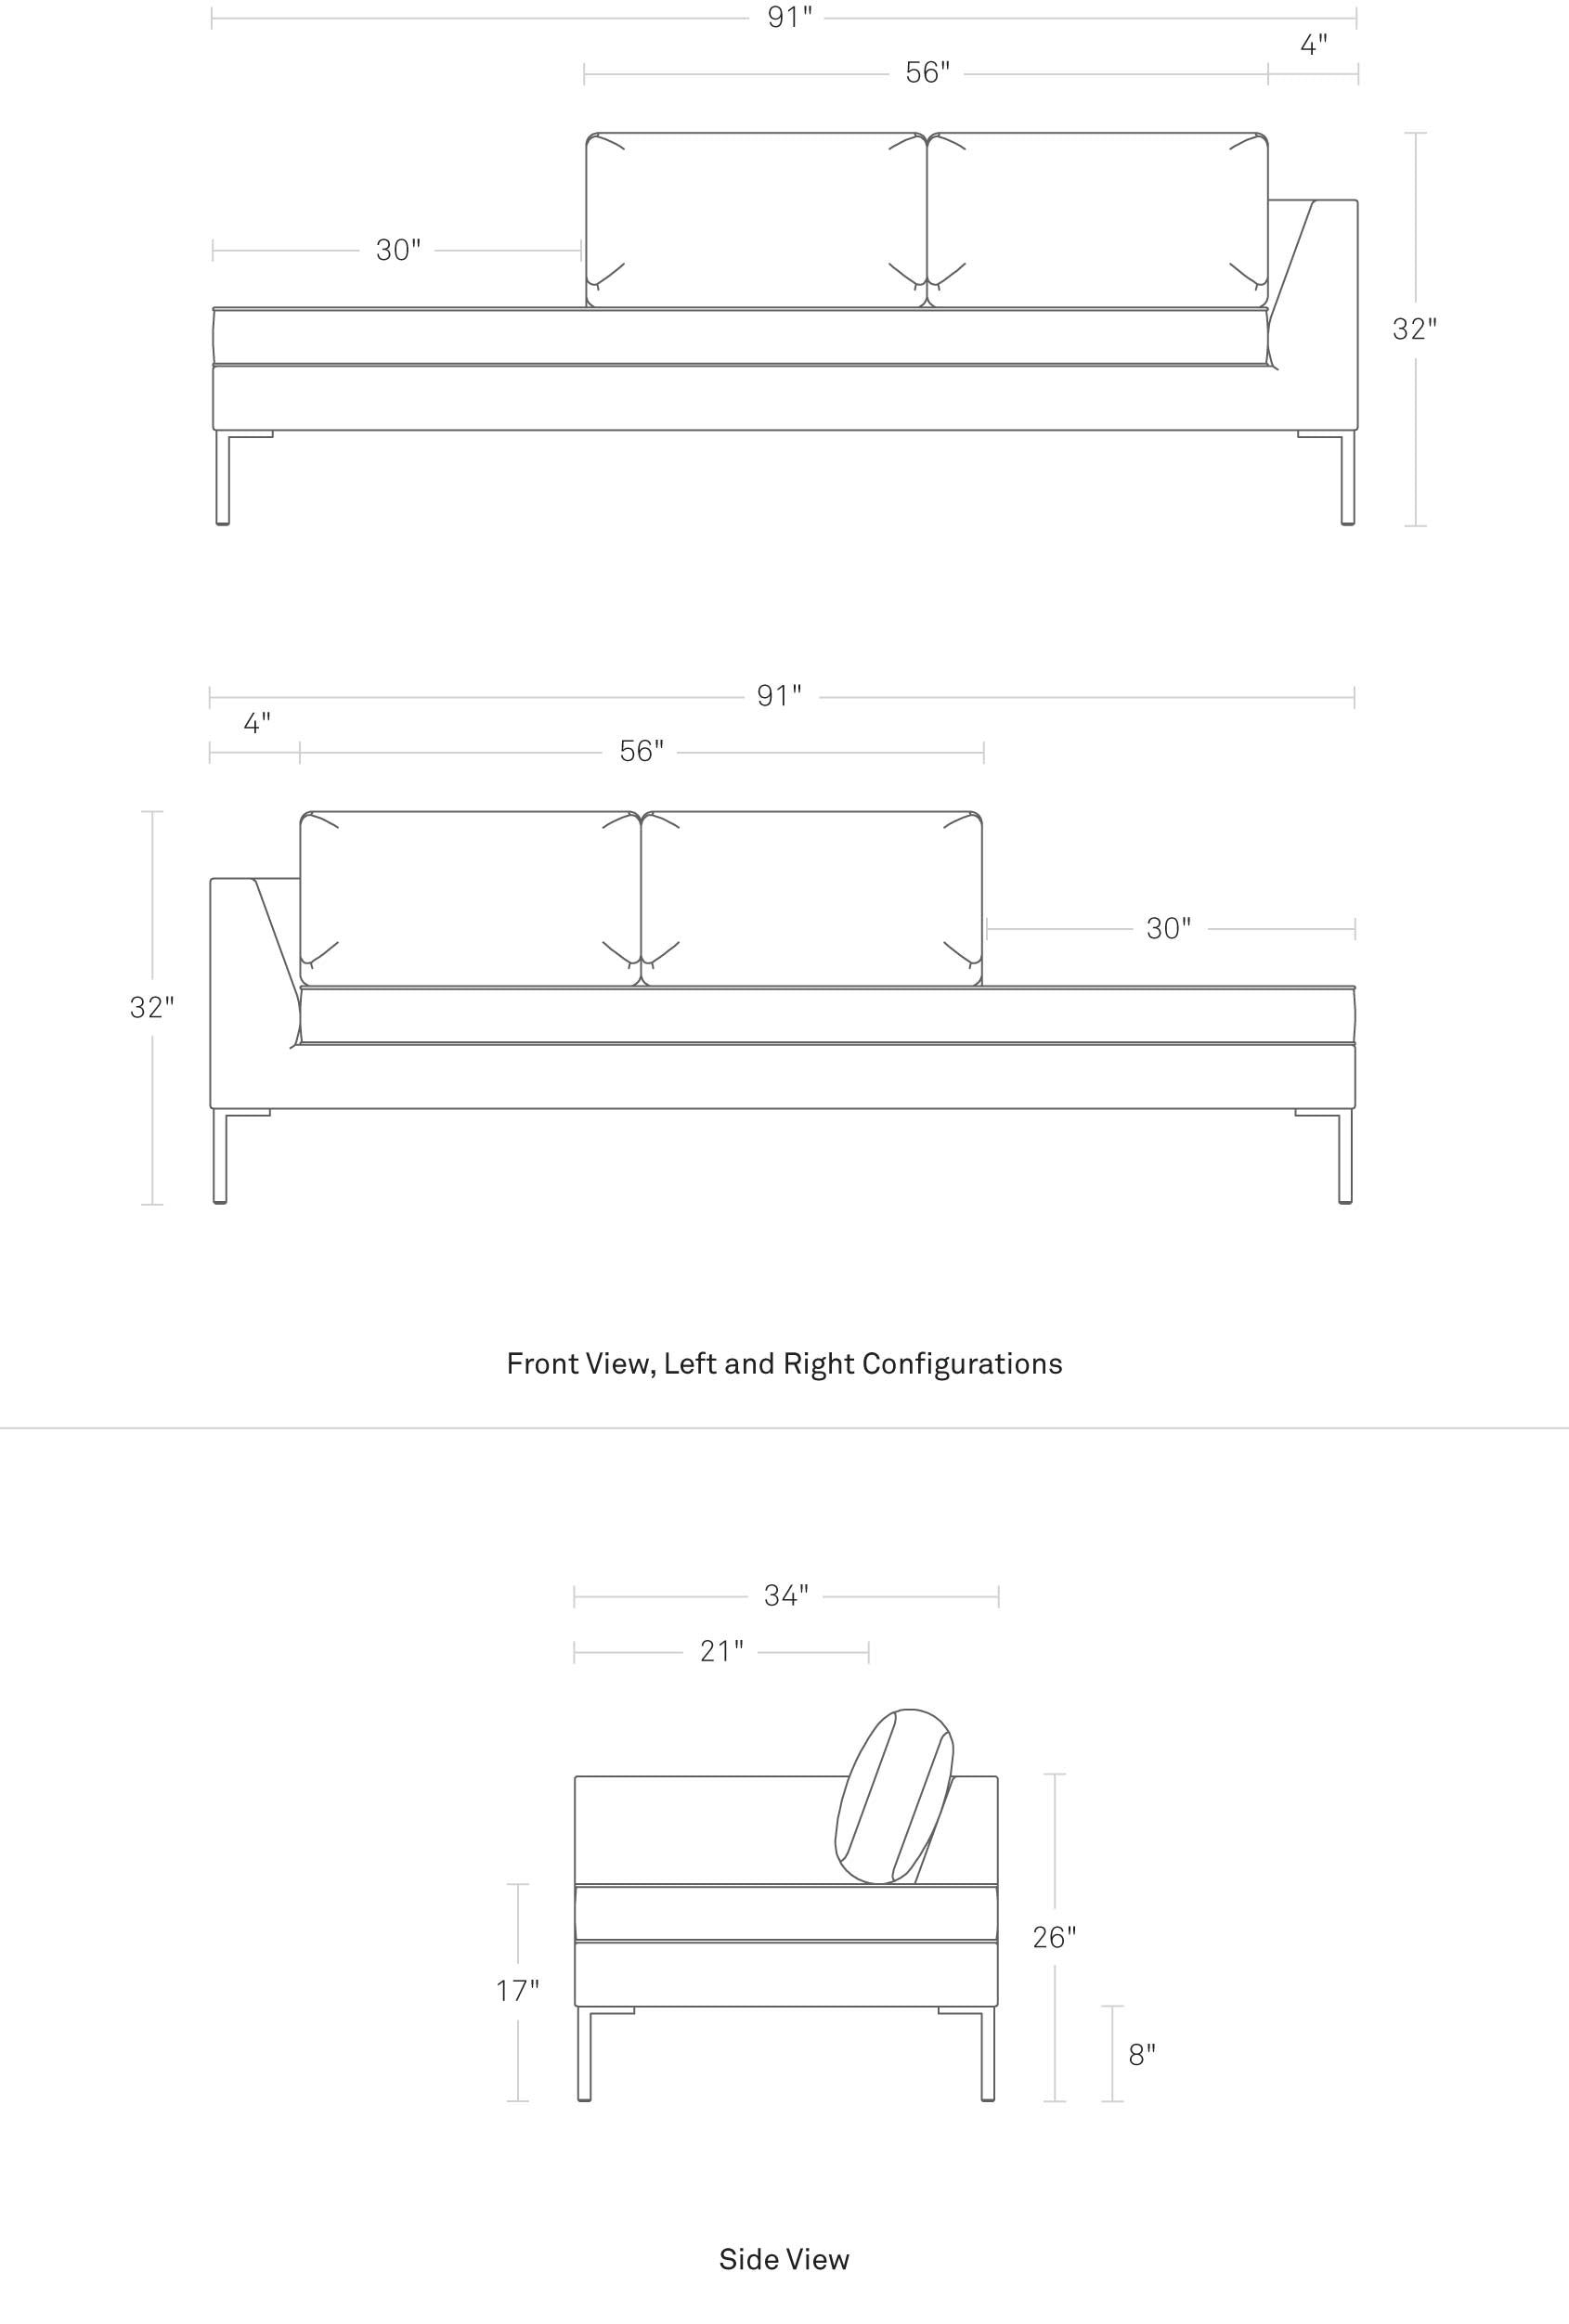 Paramount 91" Daybed Left